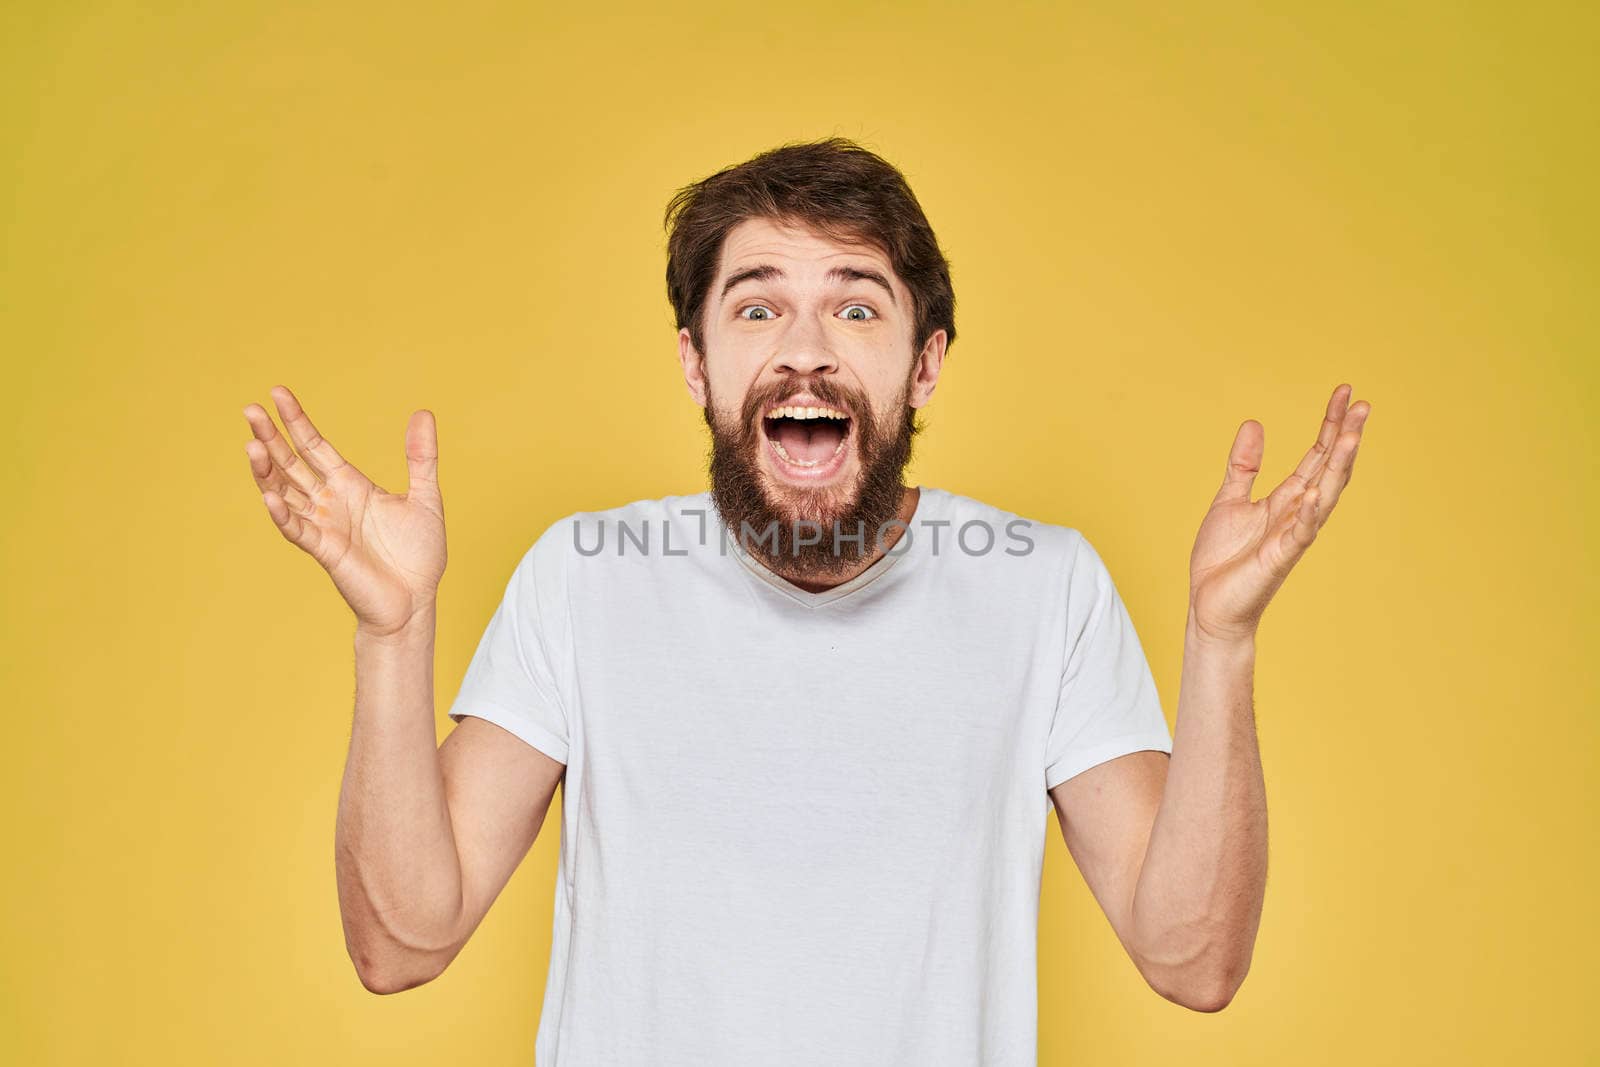 Bearded man on emotions white t-shirt fun lifestyle yellow background by SHOTPRIME